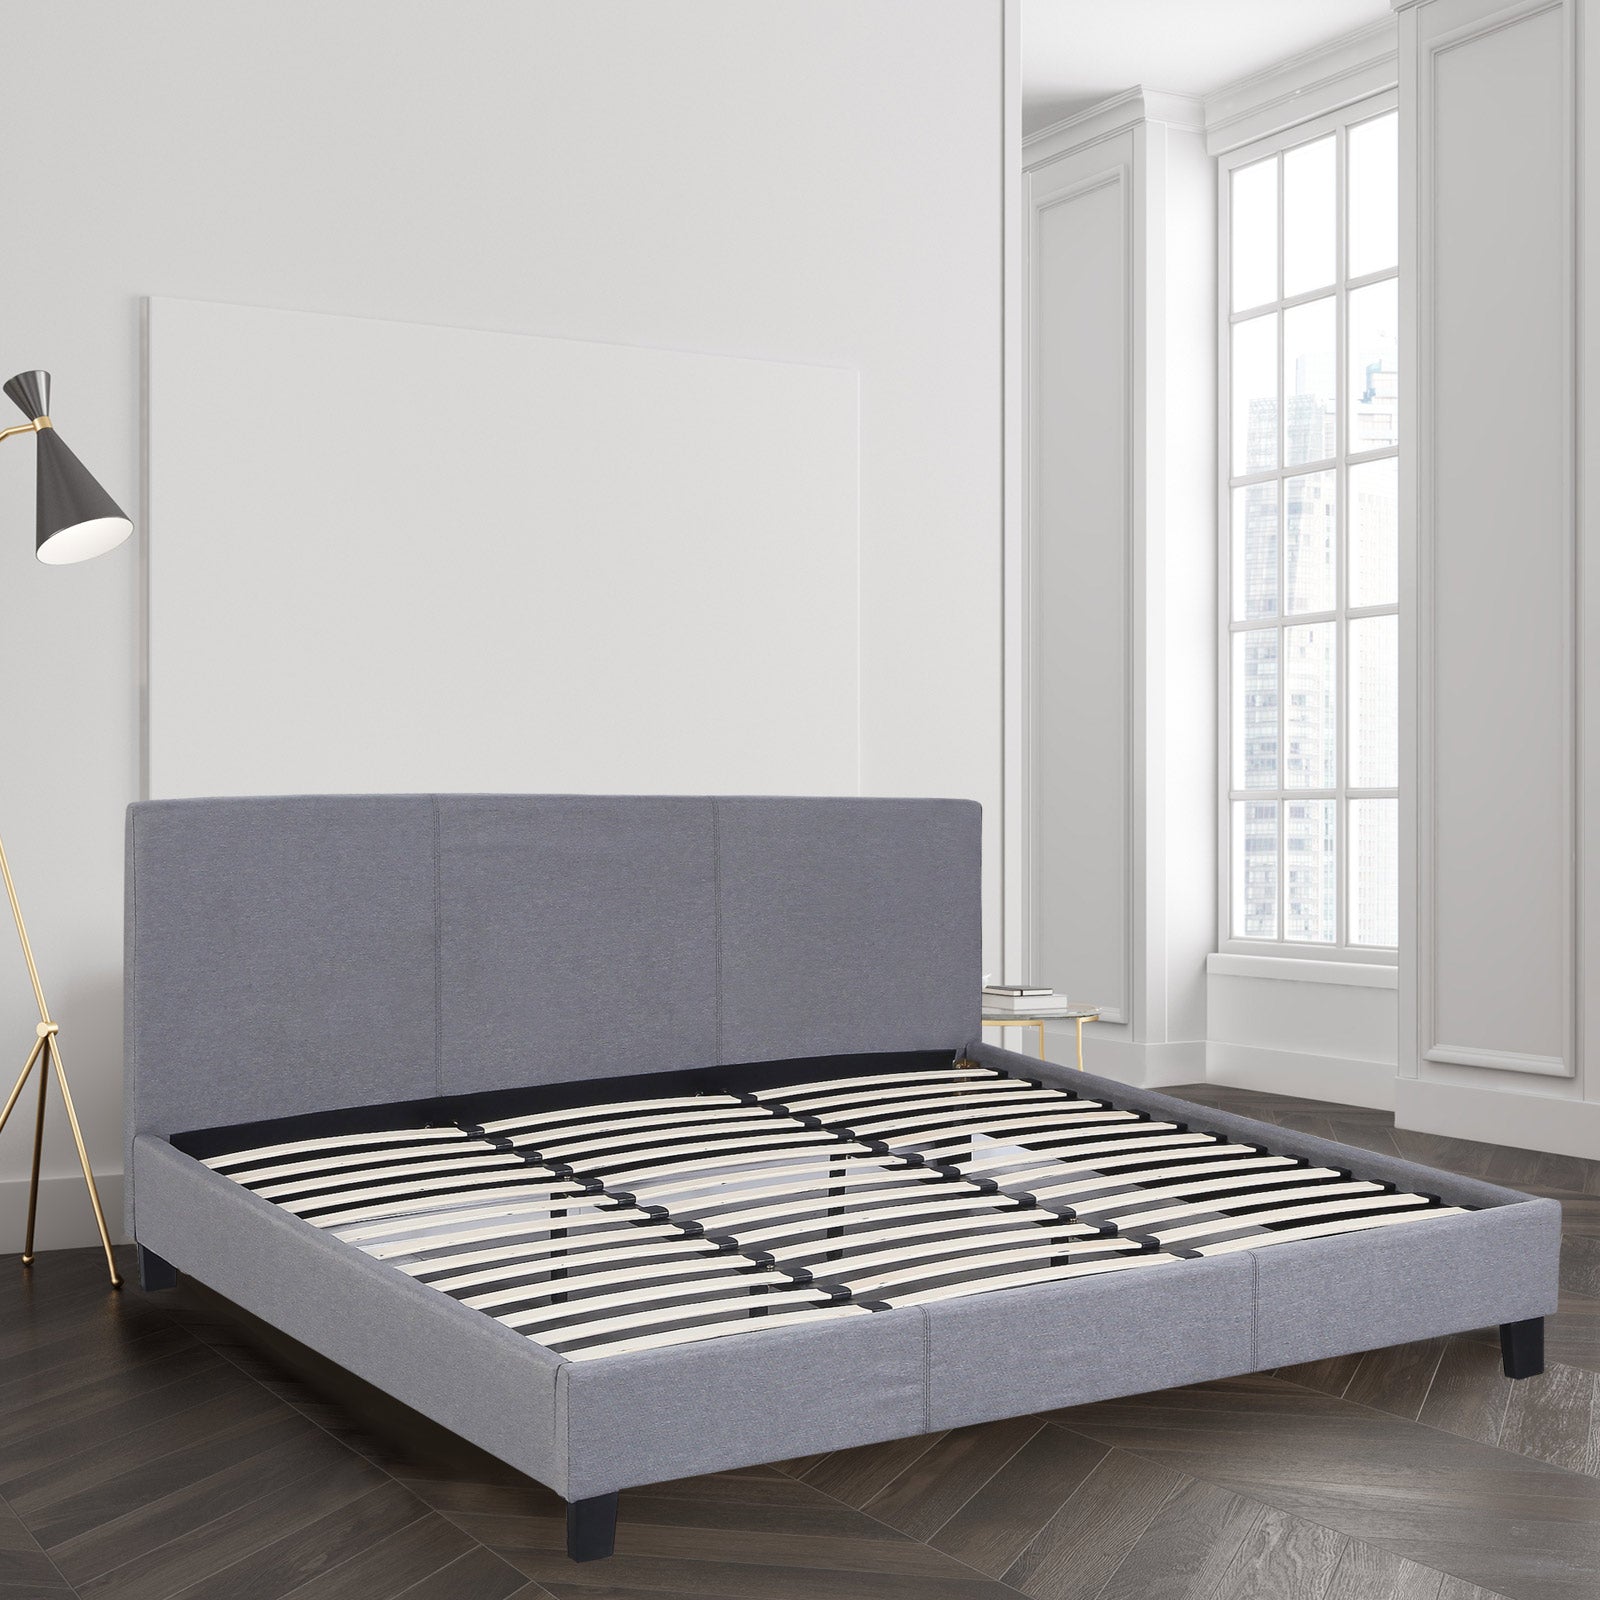 Milano Sienna Luxury Bed Frame Base And Headboard Solid Wood Padded Linen Fabric - King Single - Grey